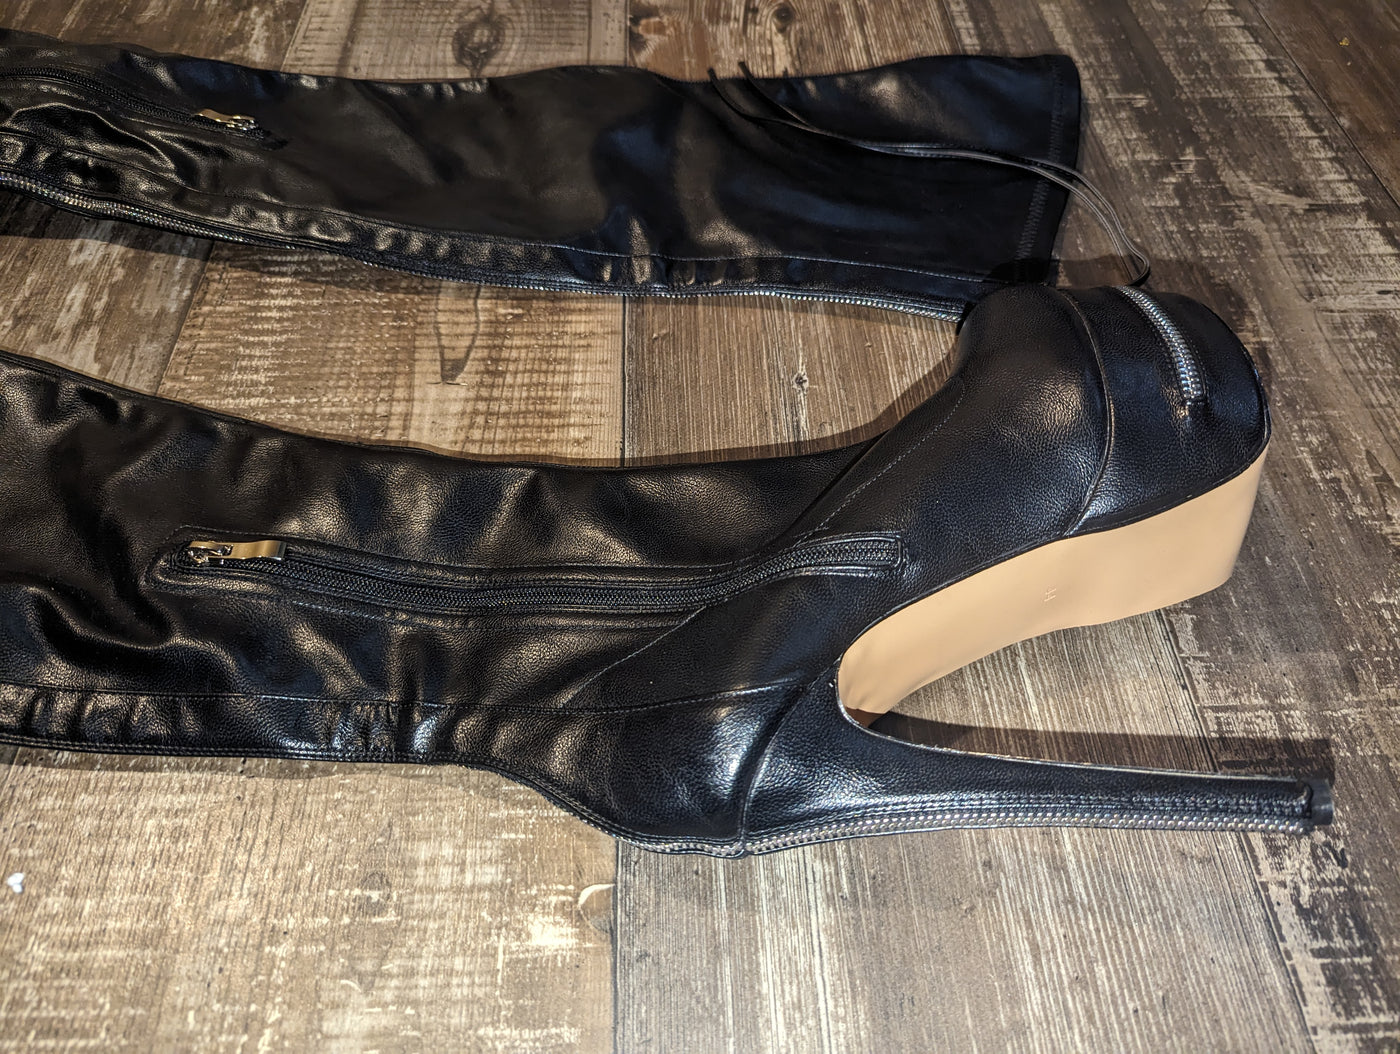 Zipper Boots Size 12 (Discounted)